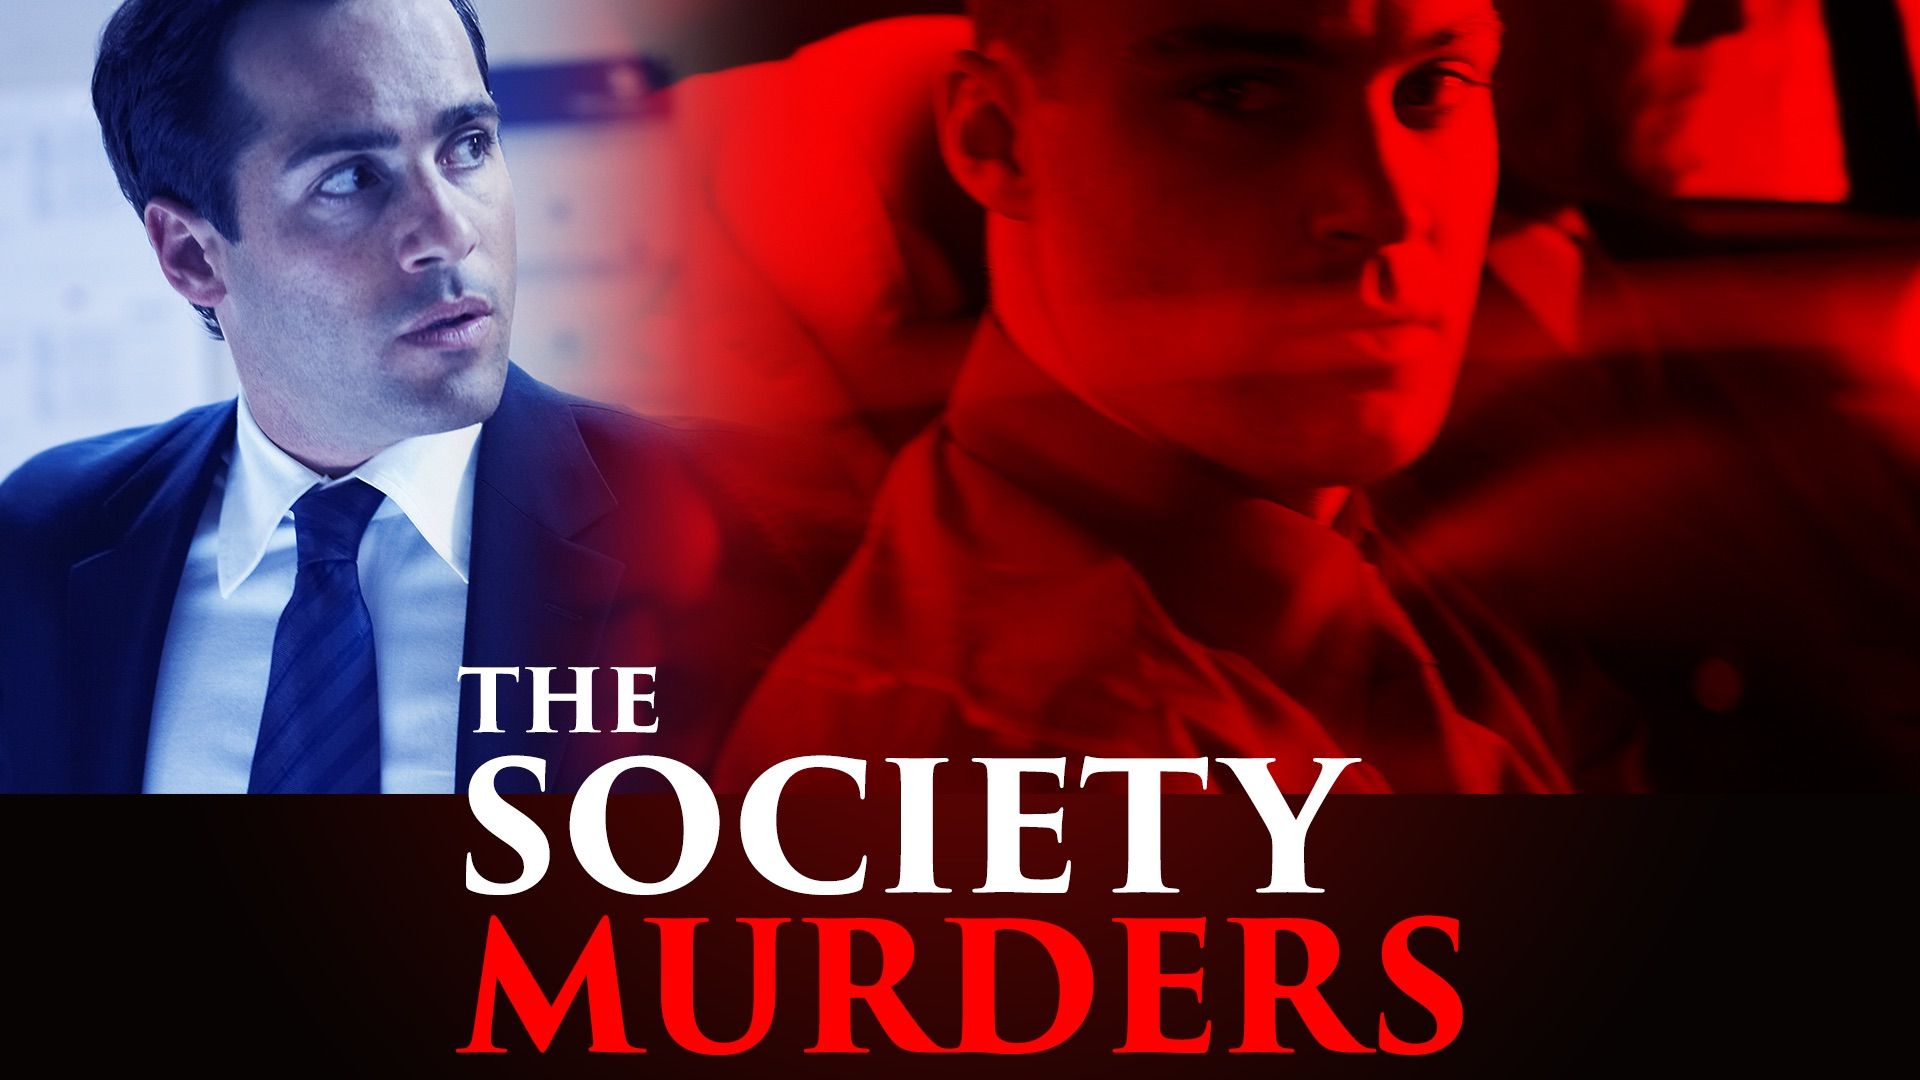 The Society Murders Backdrop